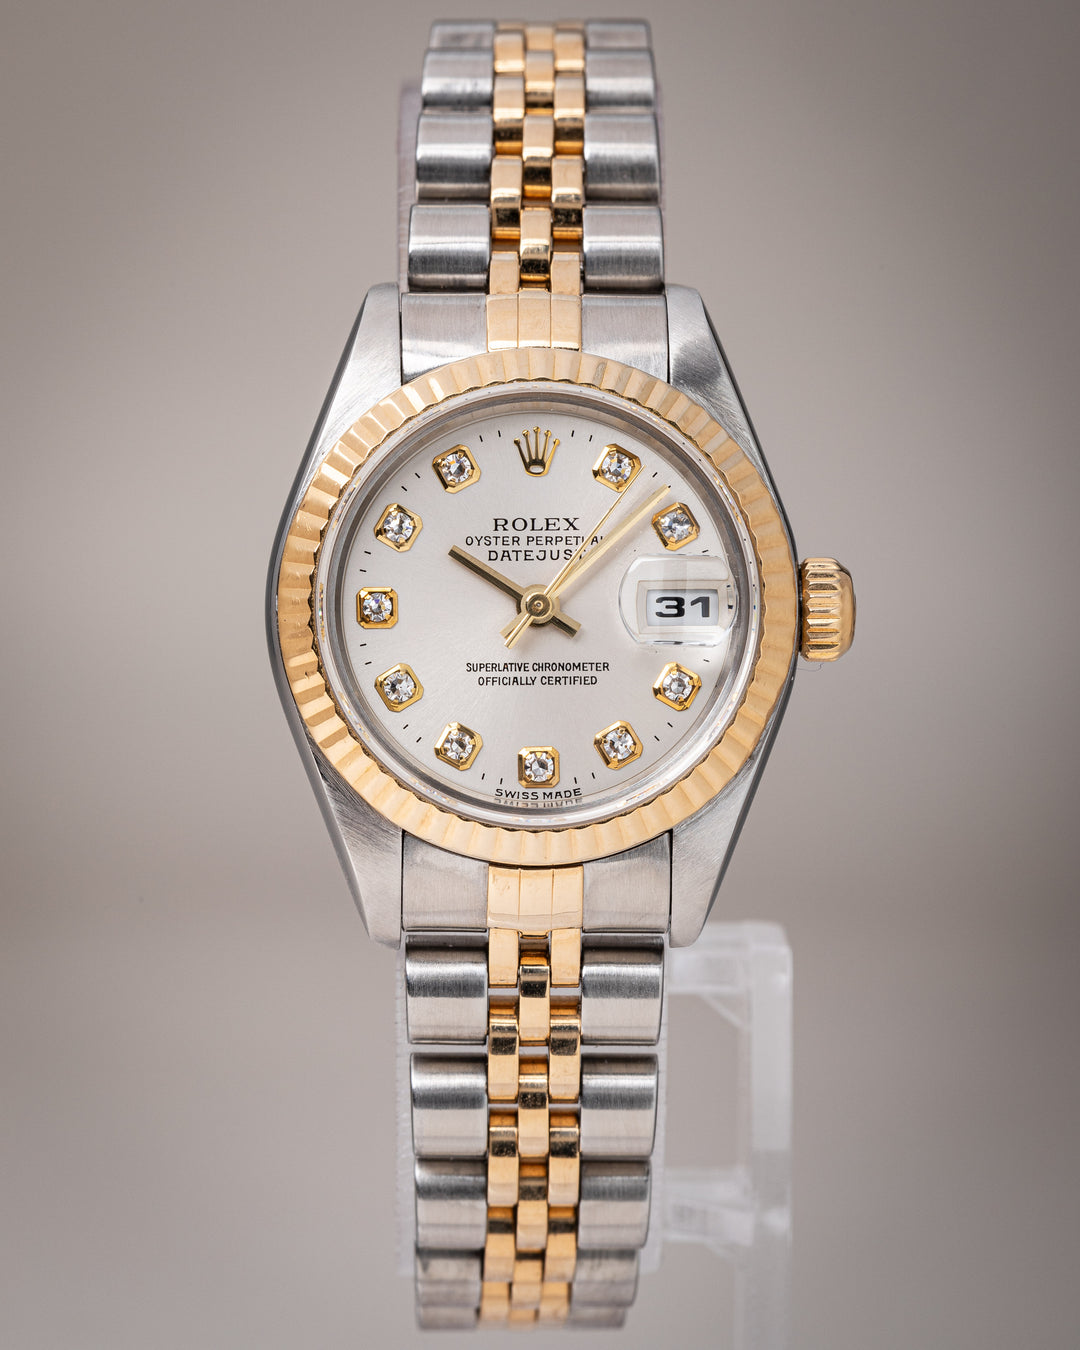 Rolex Stainless Steel and 18k Yellow Gold Women's Datejust (69173)